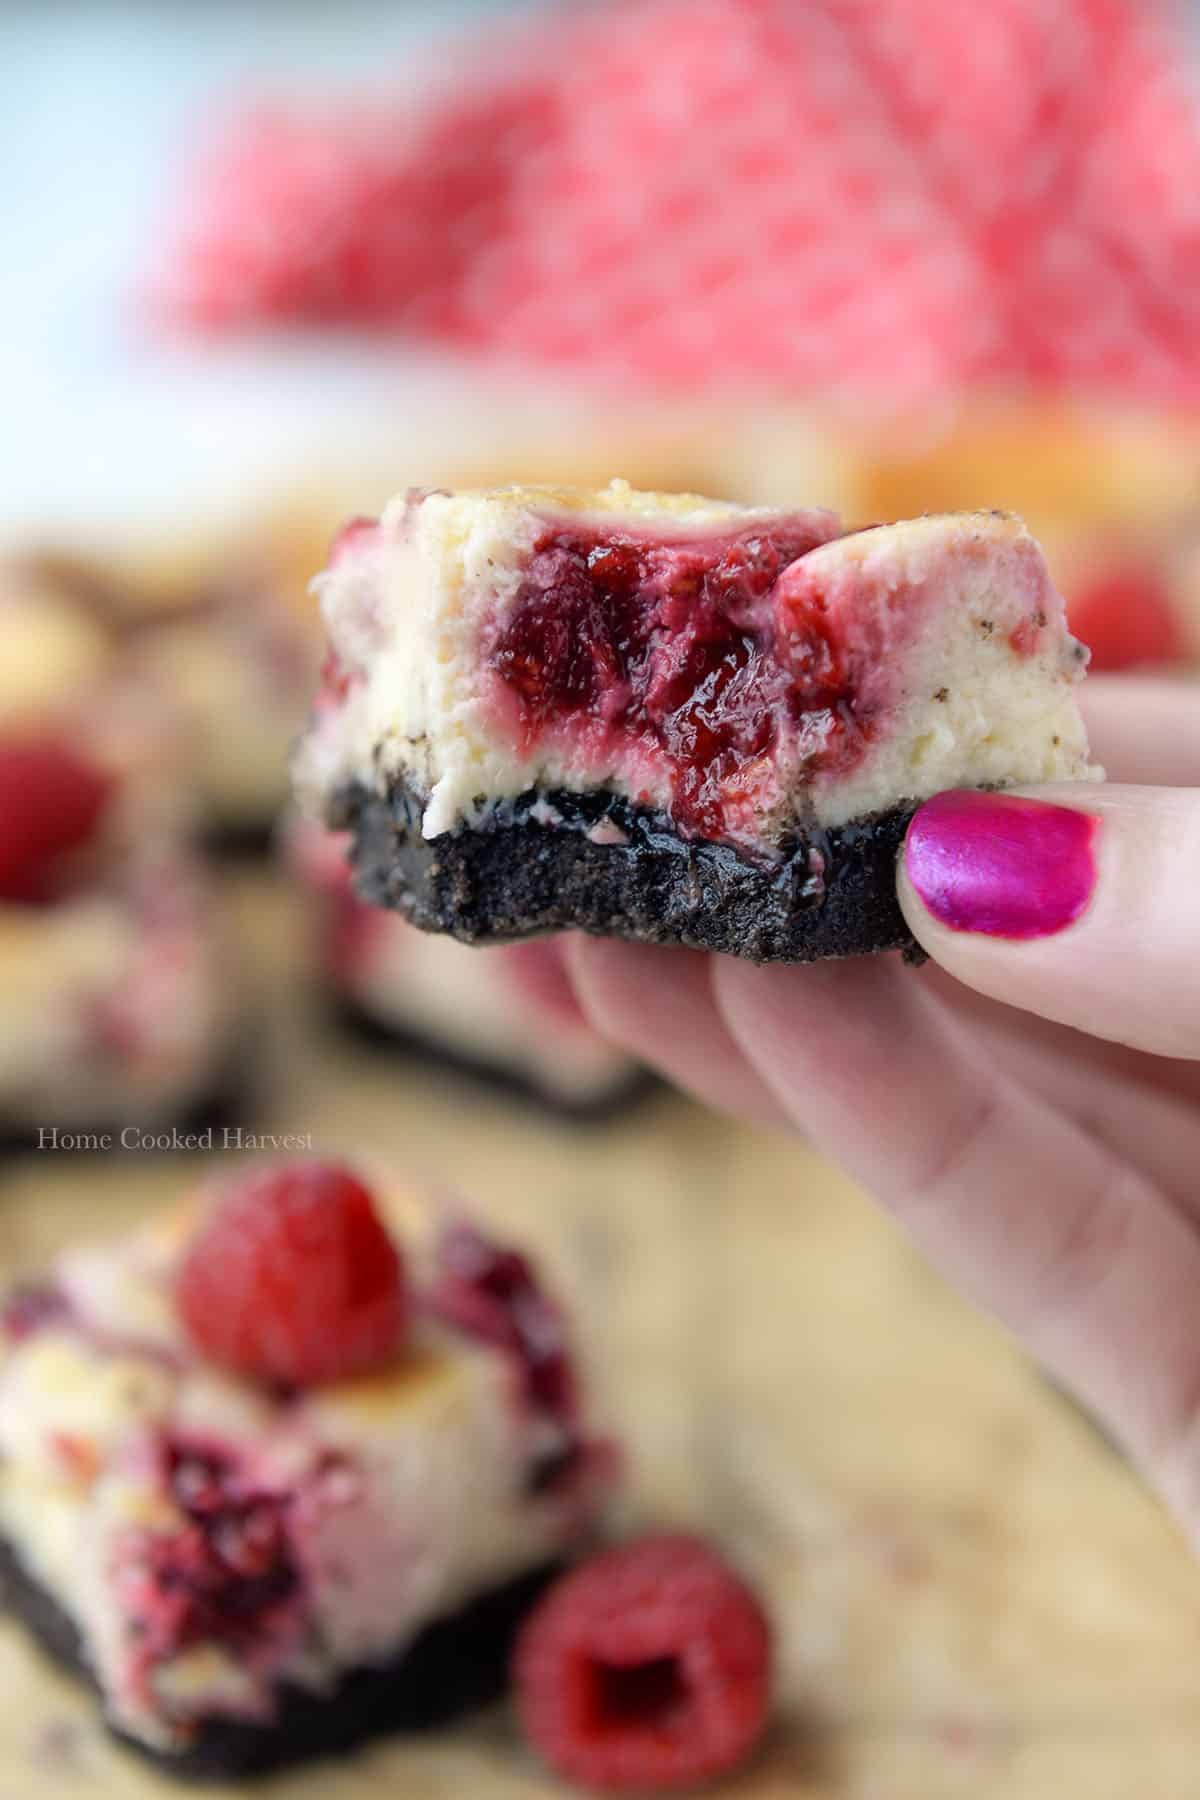 A raspberry bar with a bite missing being held.